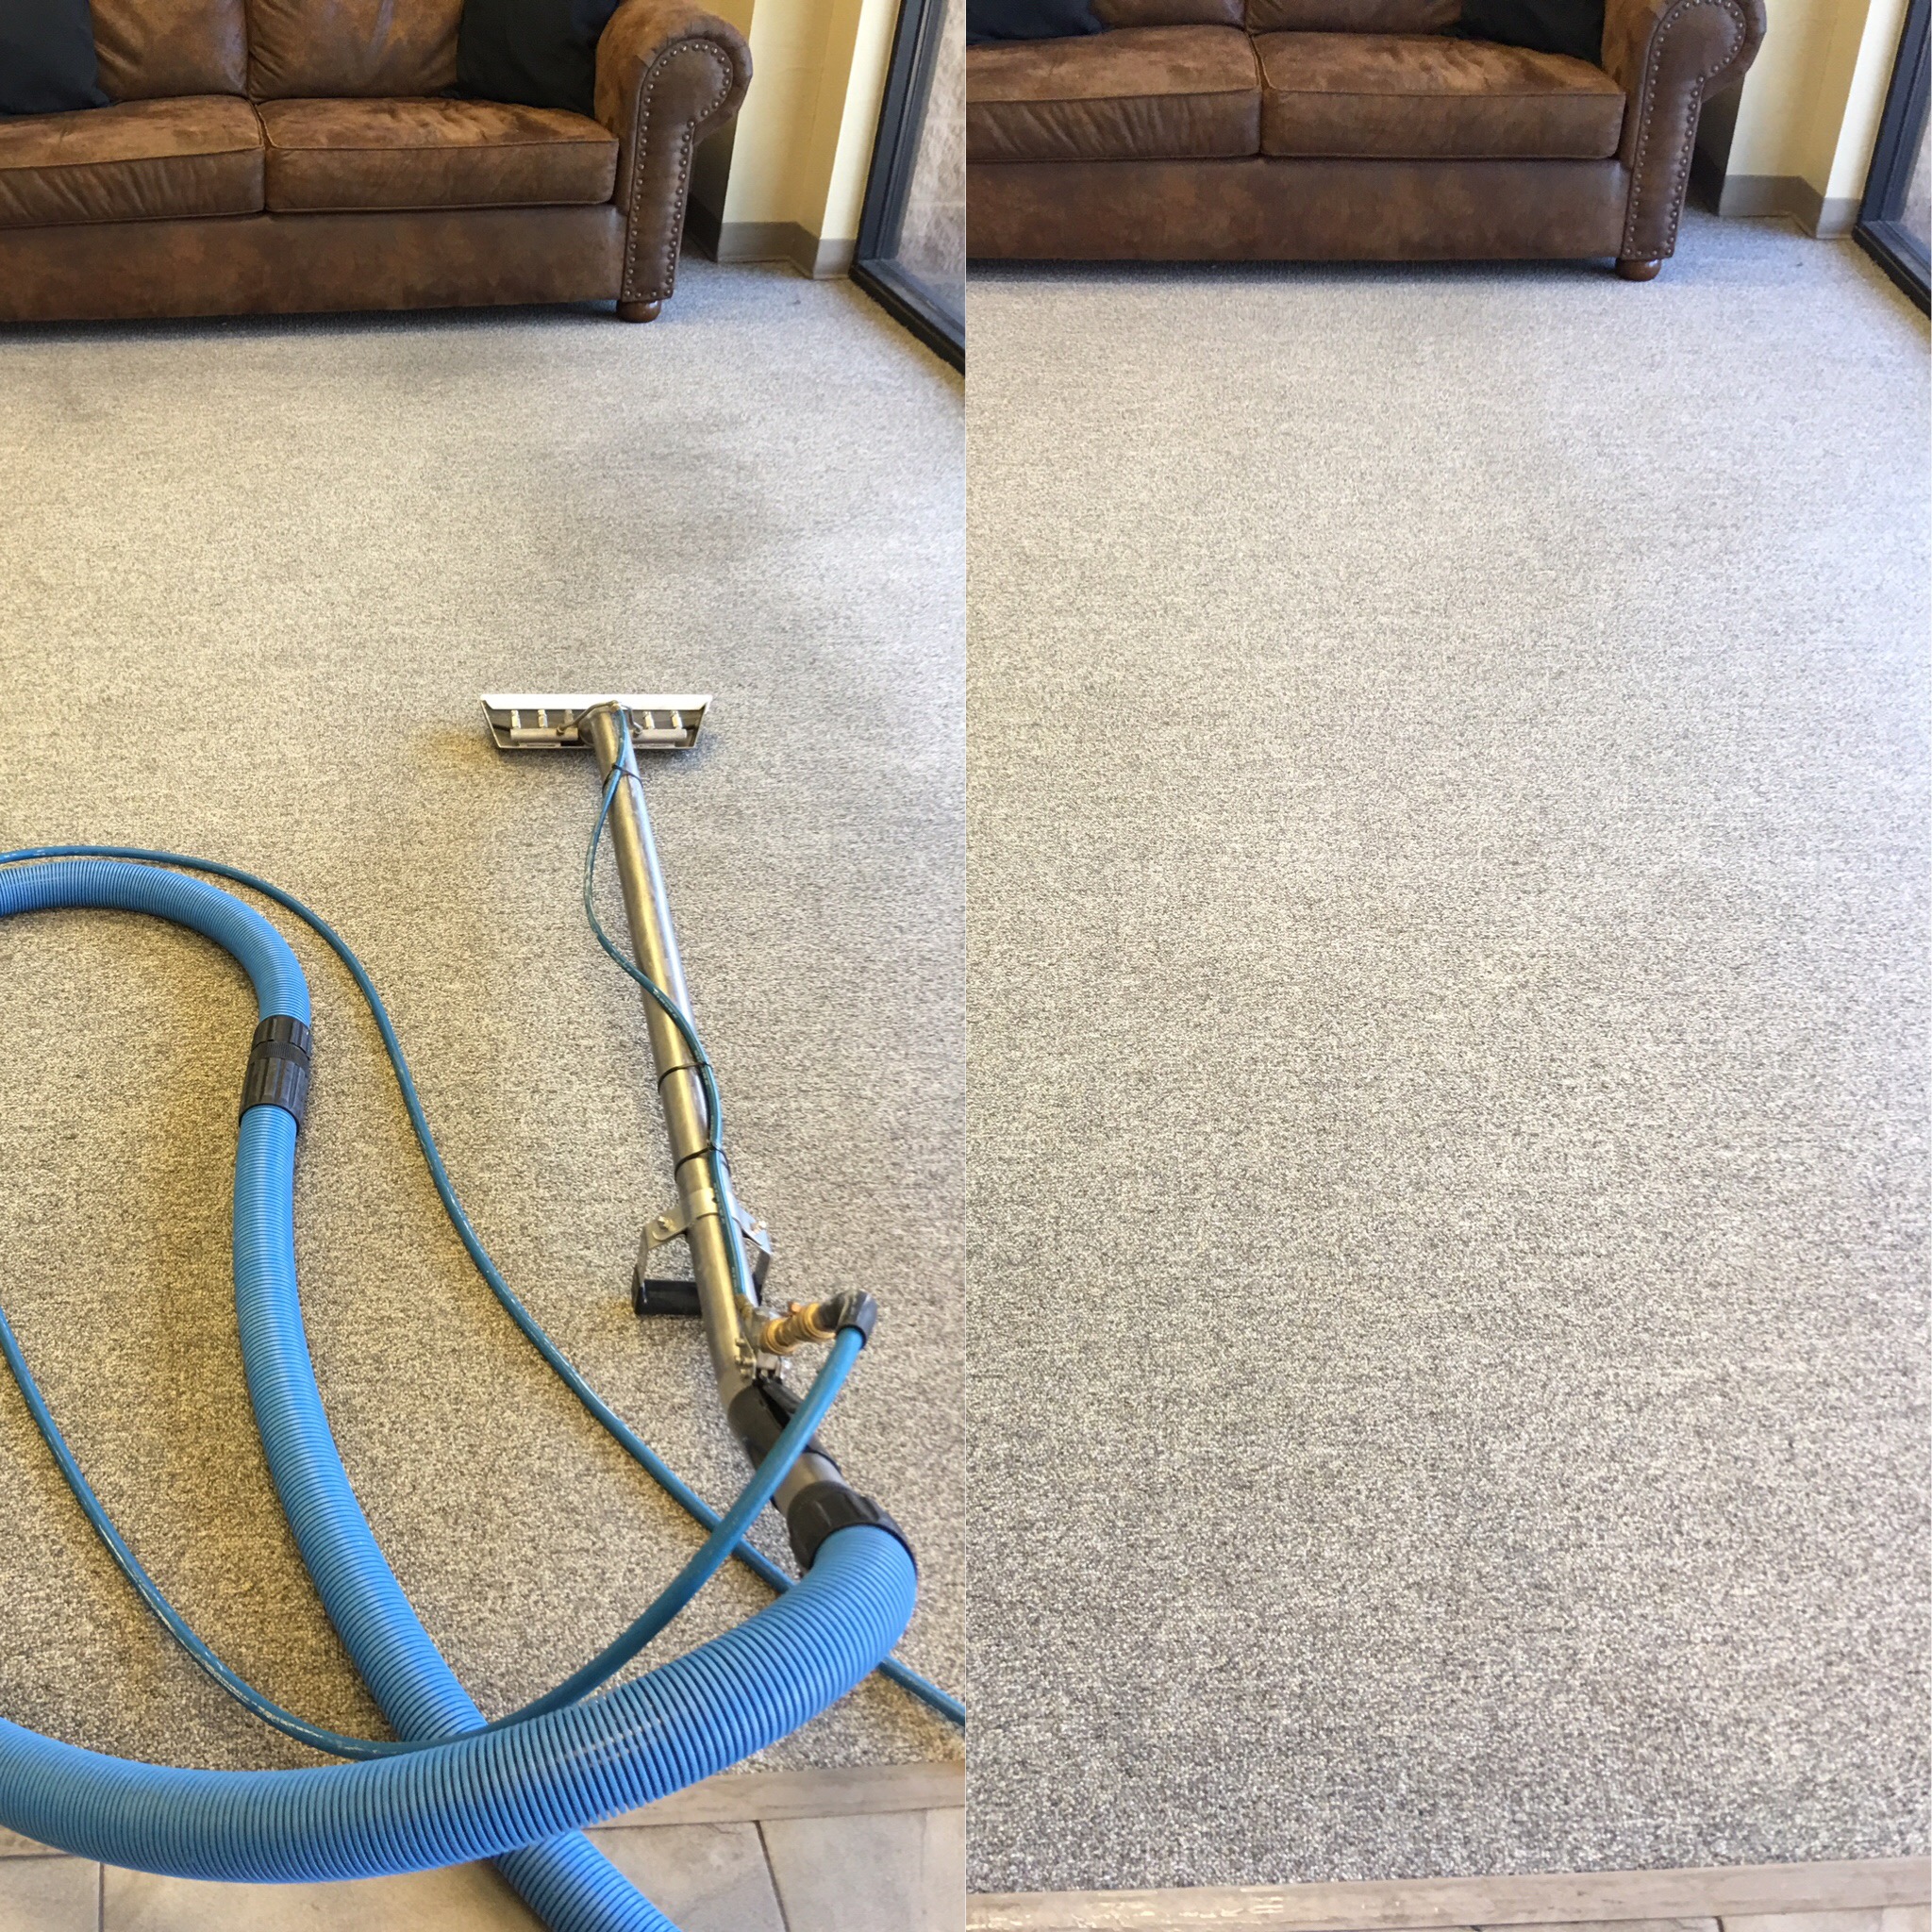 Allaman Carpet Cleaning Waddell Arizona - Carpet Before and After pics